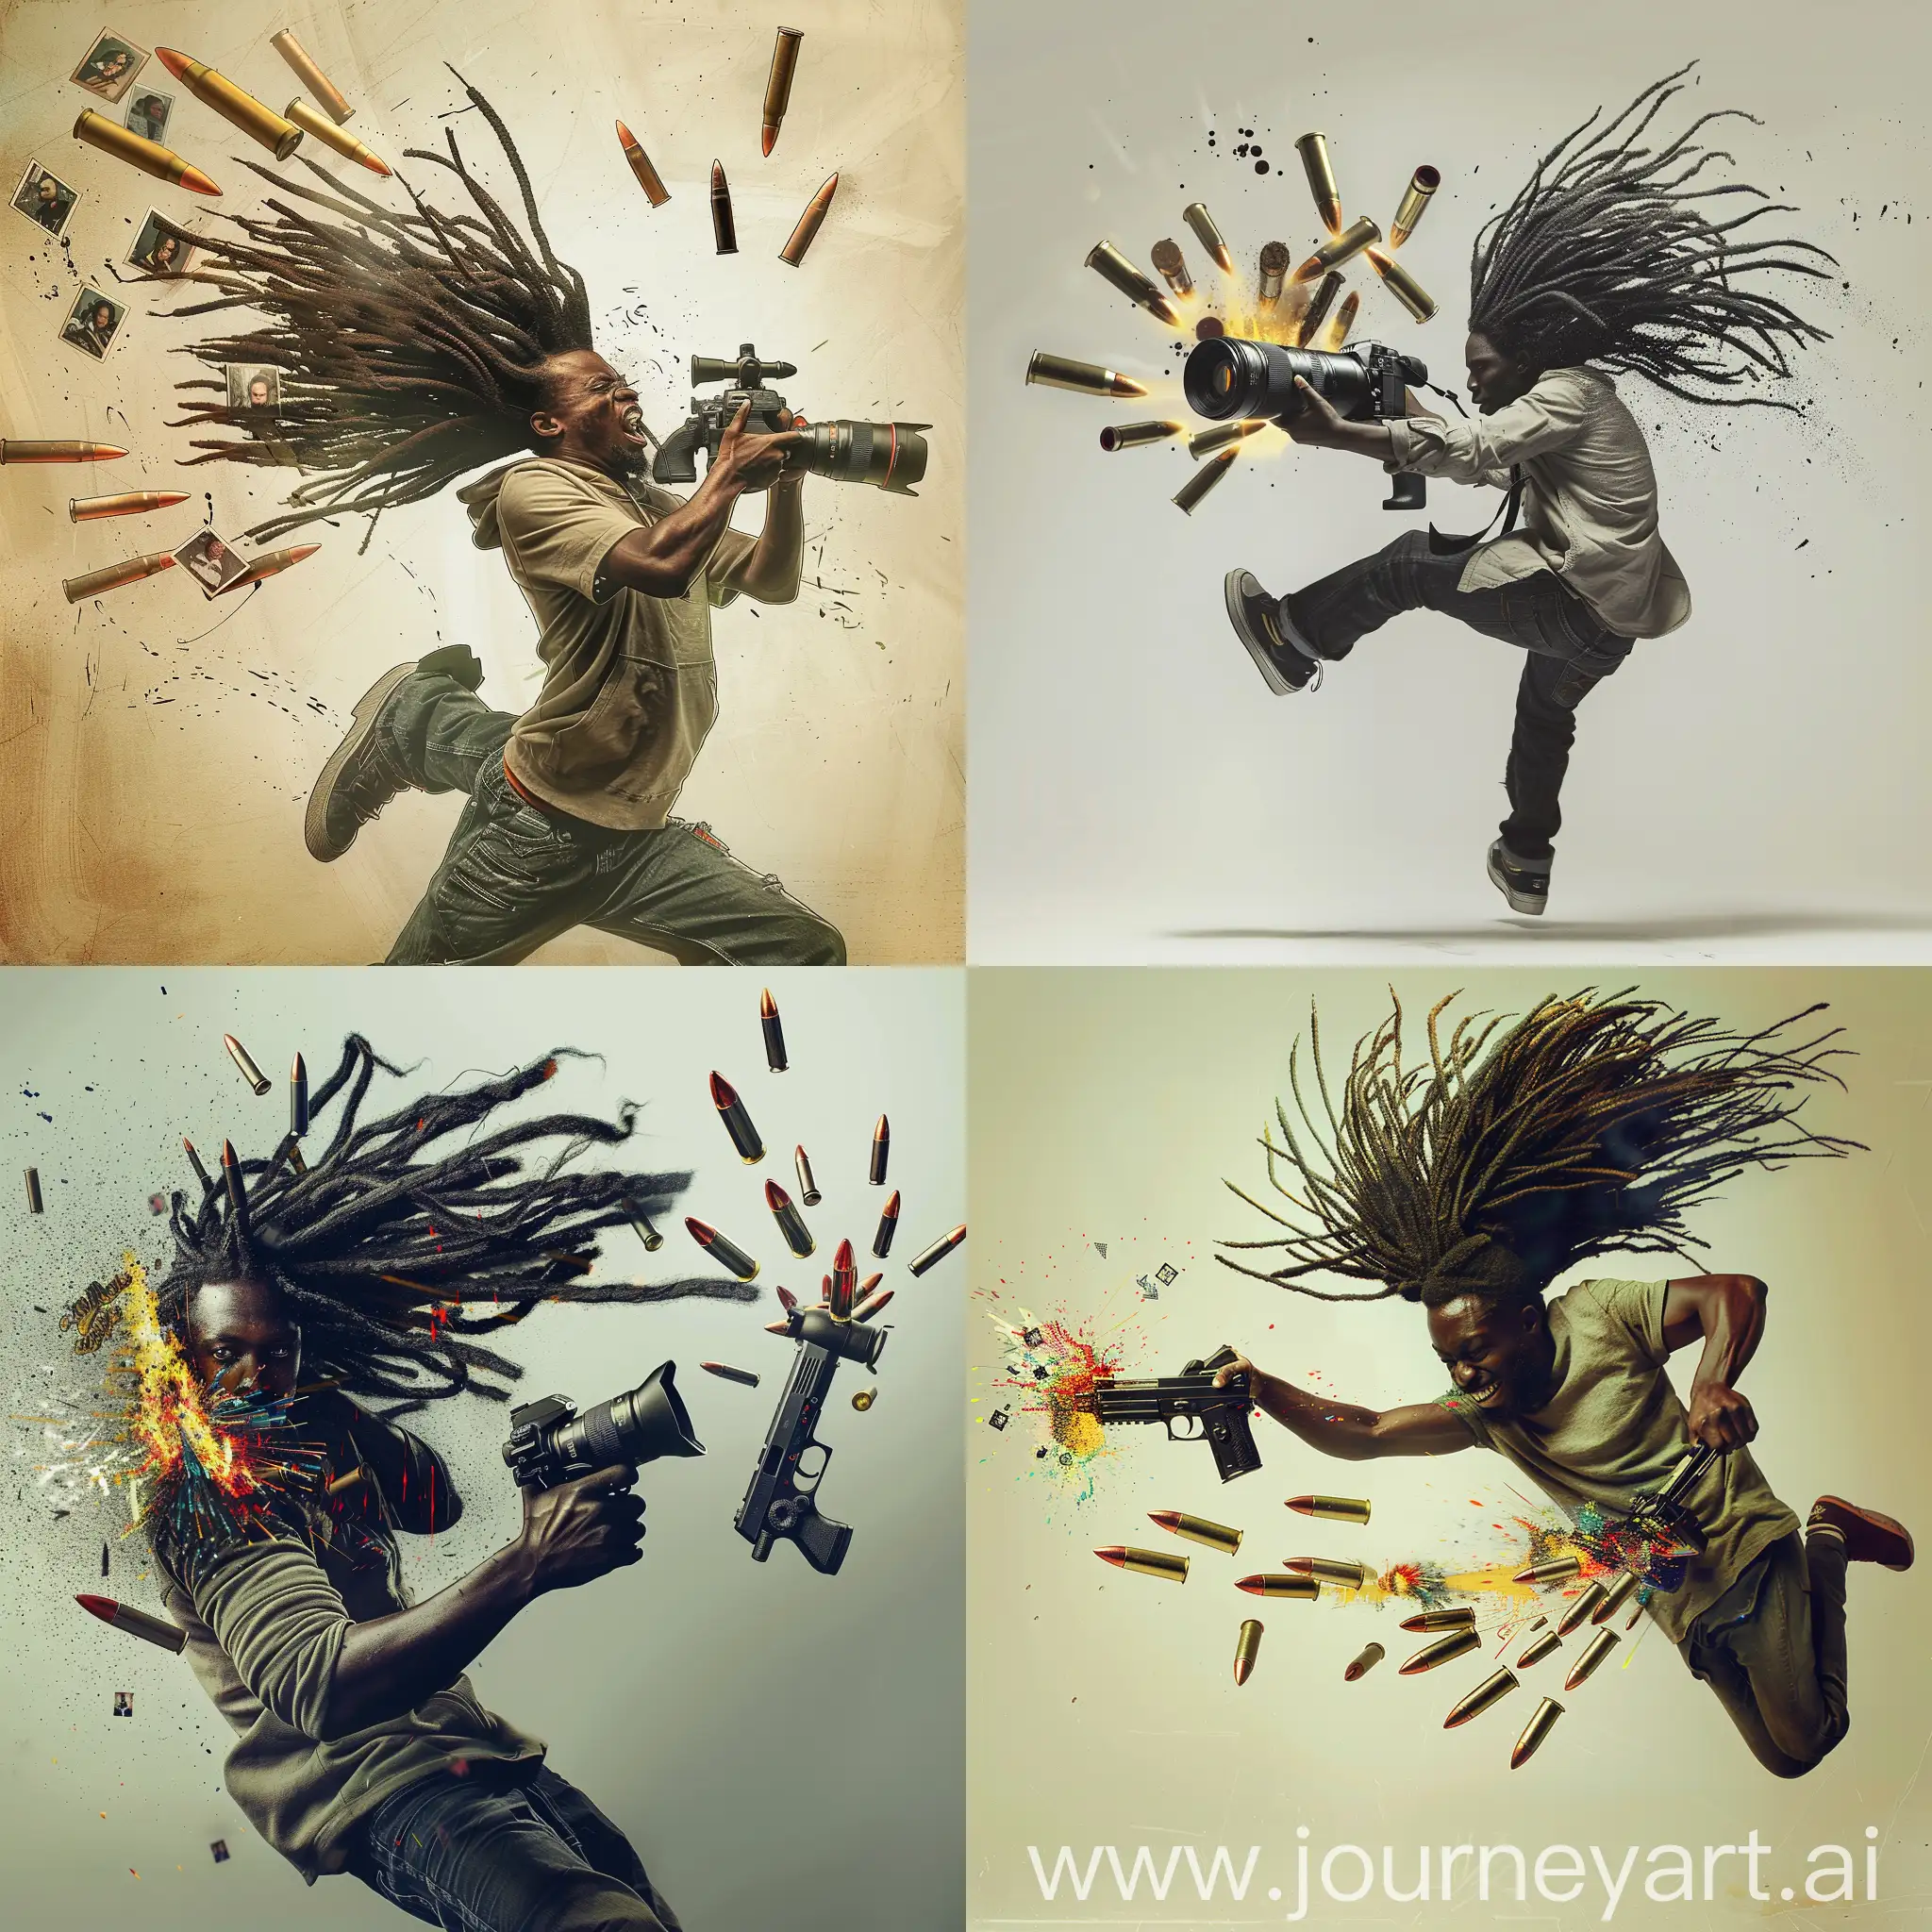 A black African photographer with locked hair spinning midair holding a camera that has a gun like trigger on the side and the camera producing bullets that are unfolding into images and portraits.